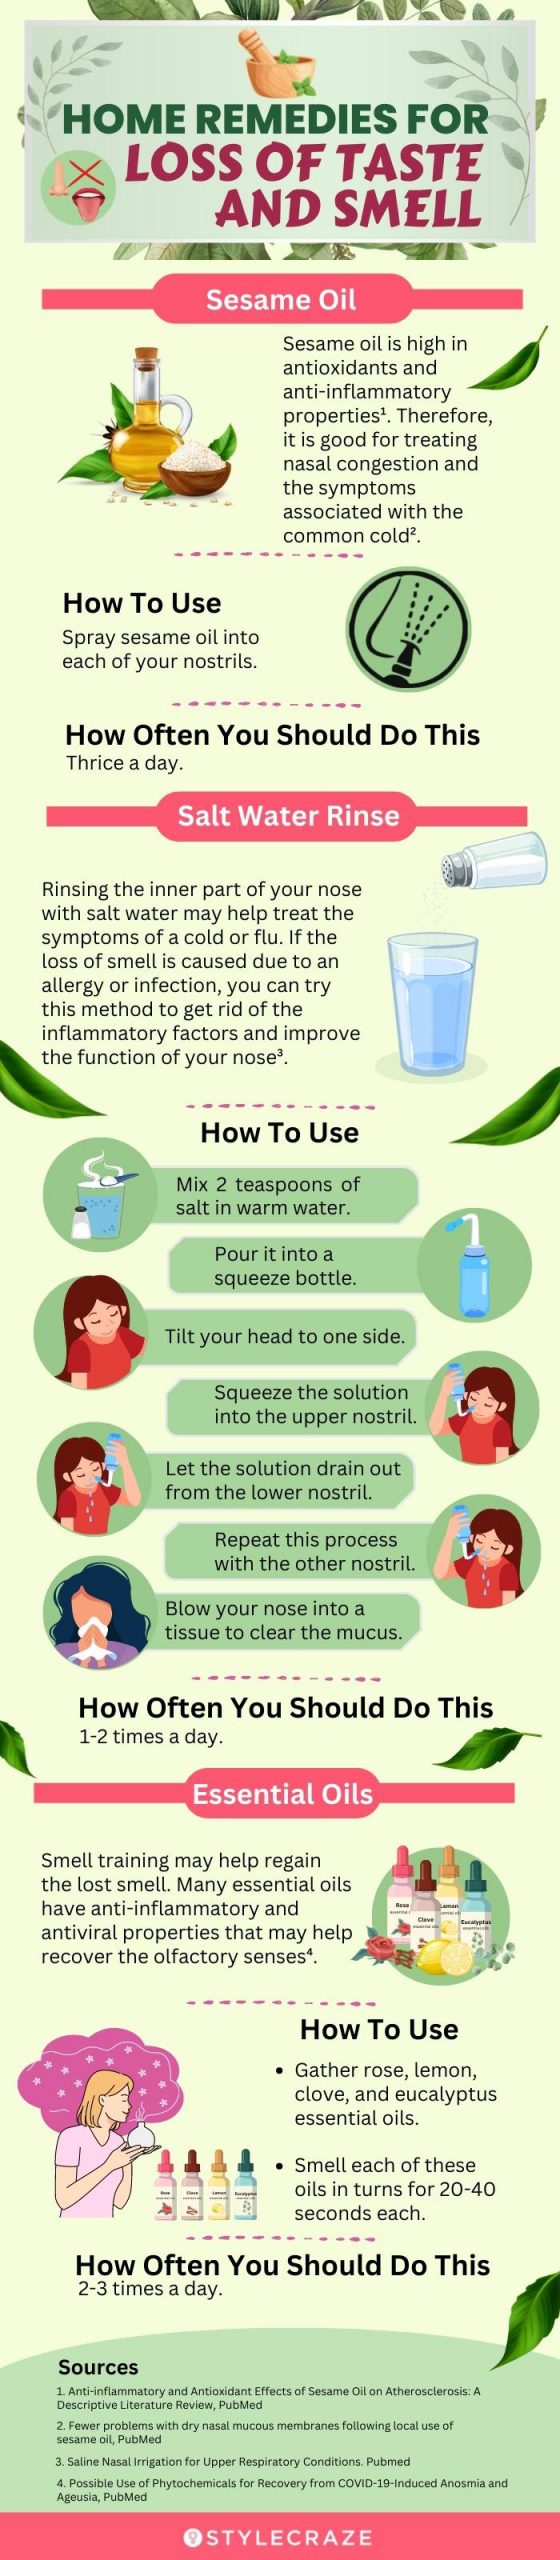 home remedies for loss of taste and smell [infographic]